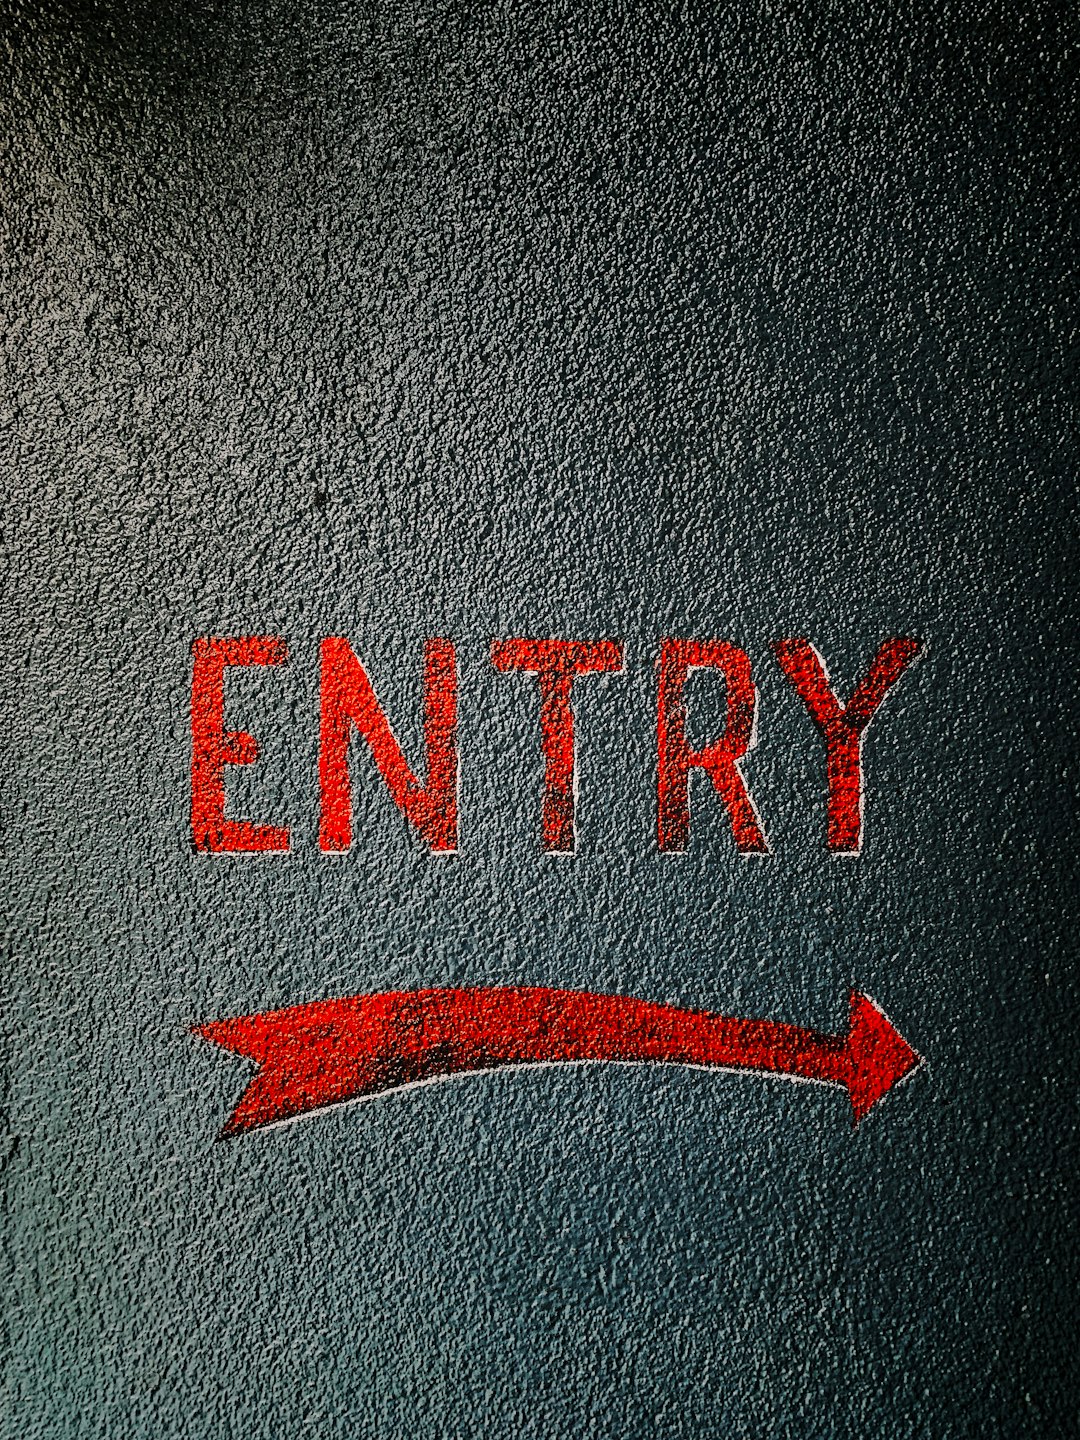 red Entry signage